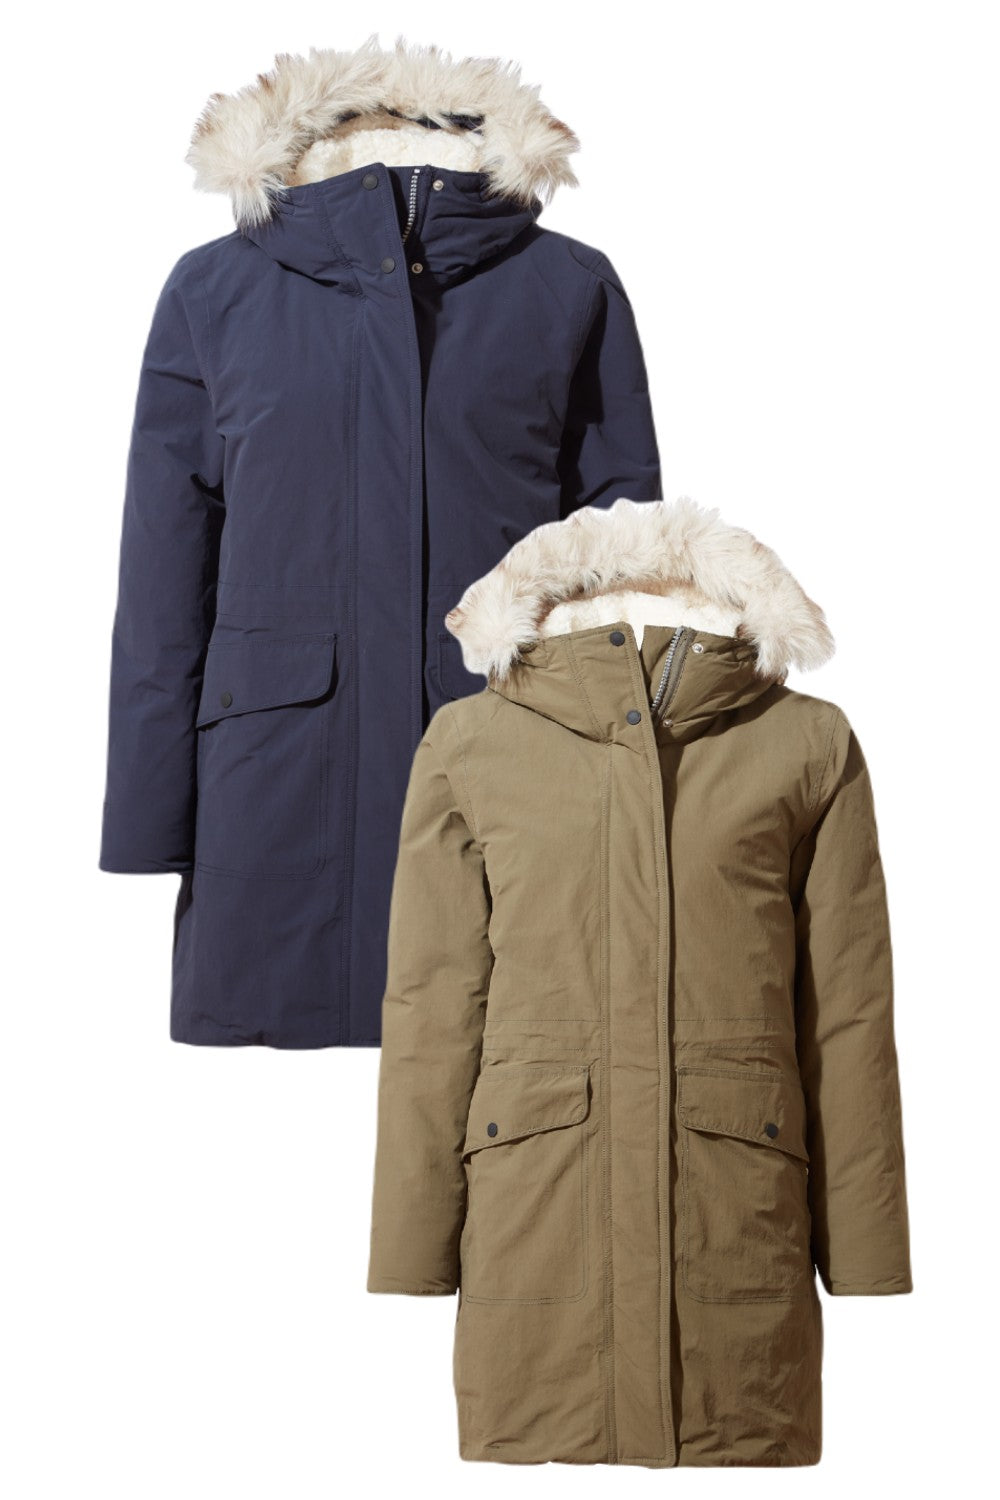 Craghoppers Lundale Waterproof Jacket in Blue Navy and Wild Olive